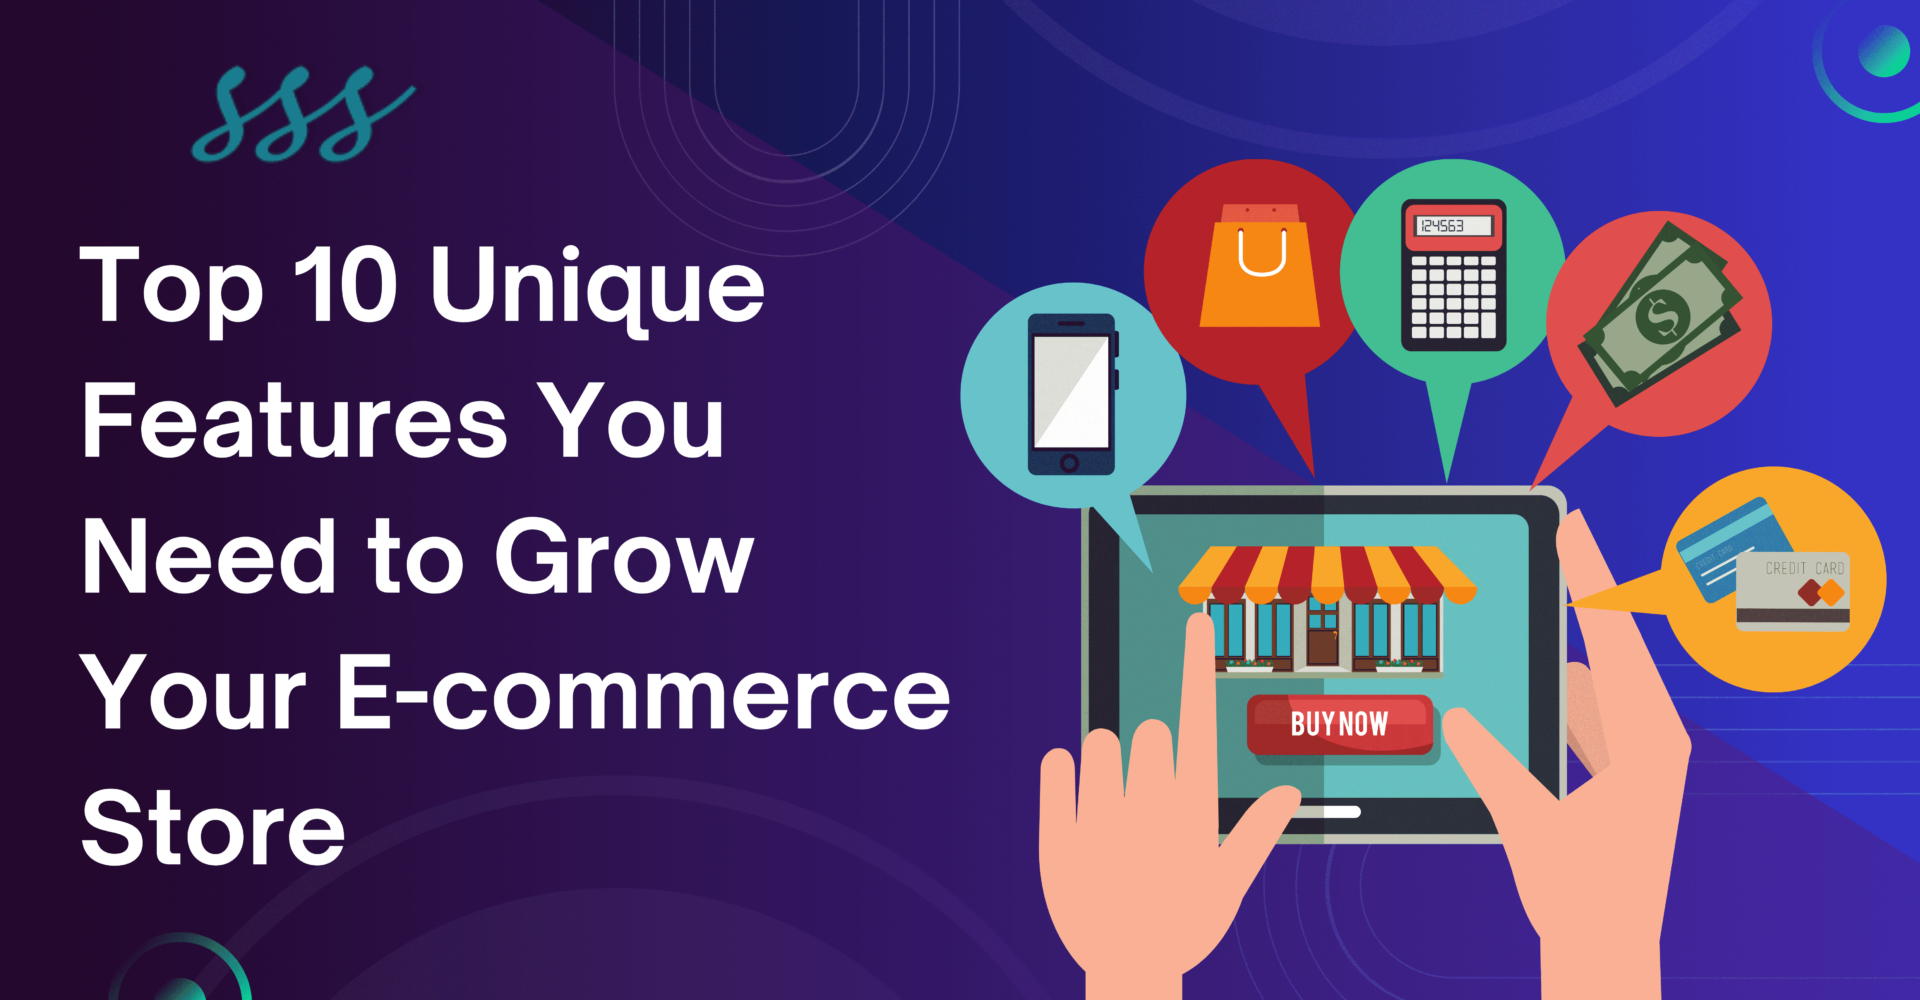 Top-10-Unique-Features-You-Need-to-Grow-Your-E-commerce-Store